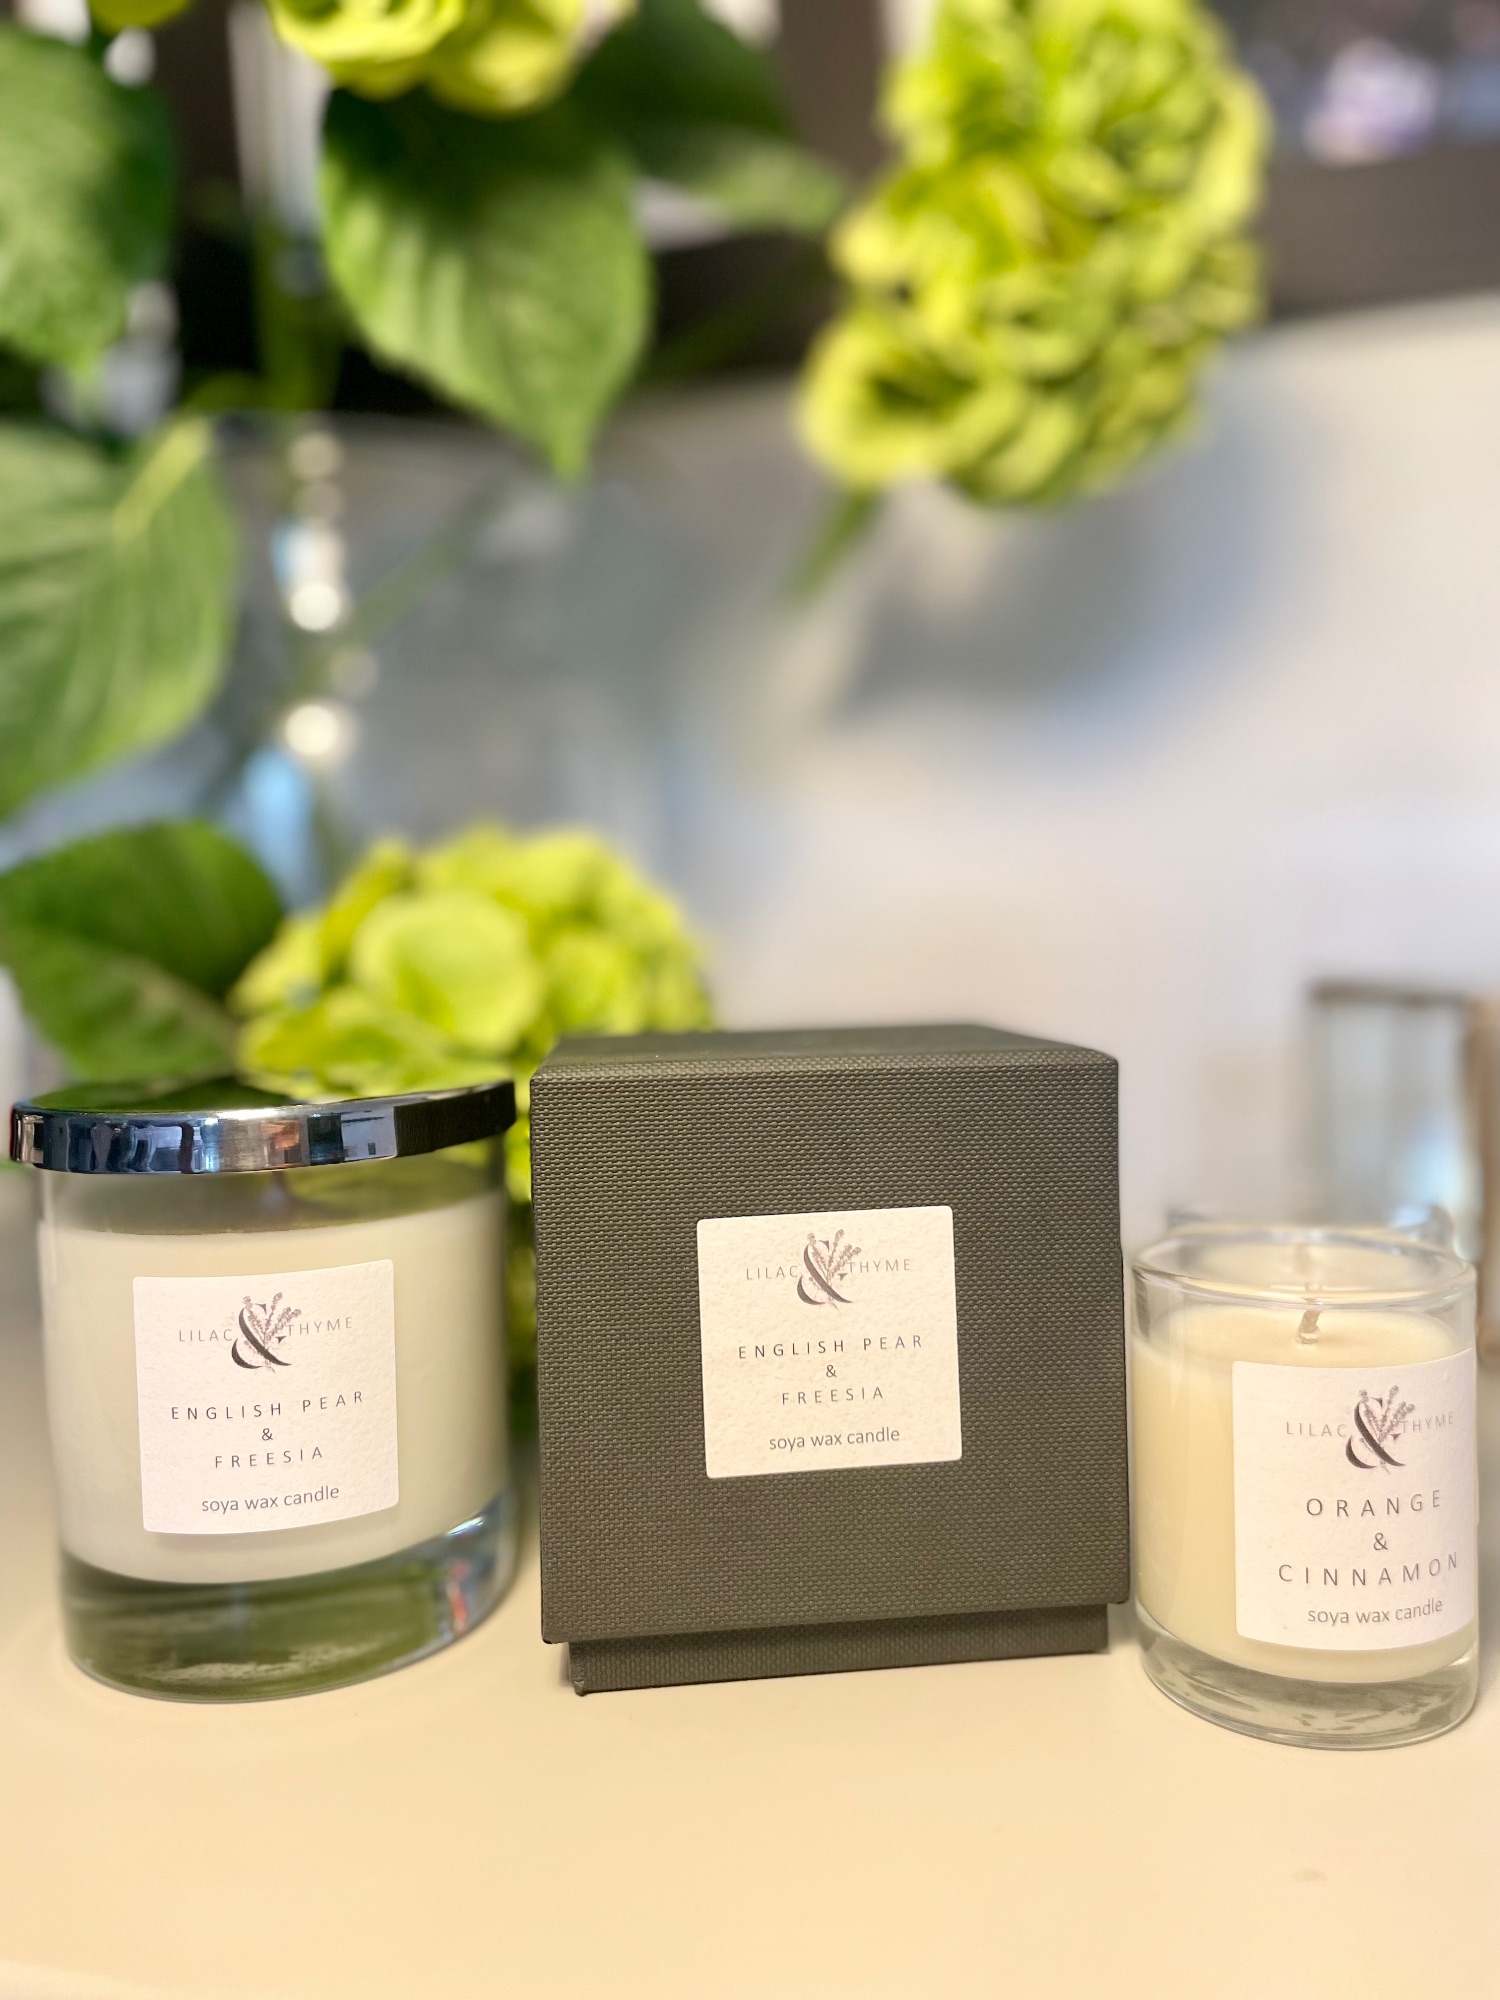 Lilac and Thyme, the home of beautiful hand-crafted candles, artisan  perfume and skincare. We use only our own original formulations,  manufacturing all products in small quality-controlled batches from our  Northumbrian farmhouse studio.